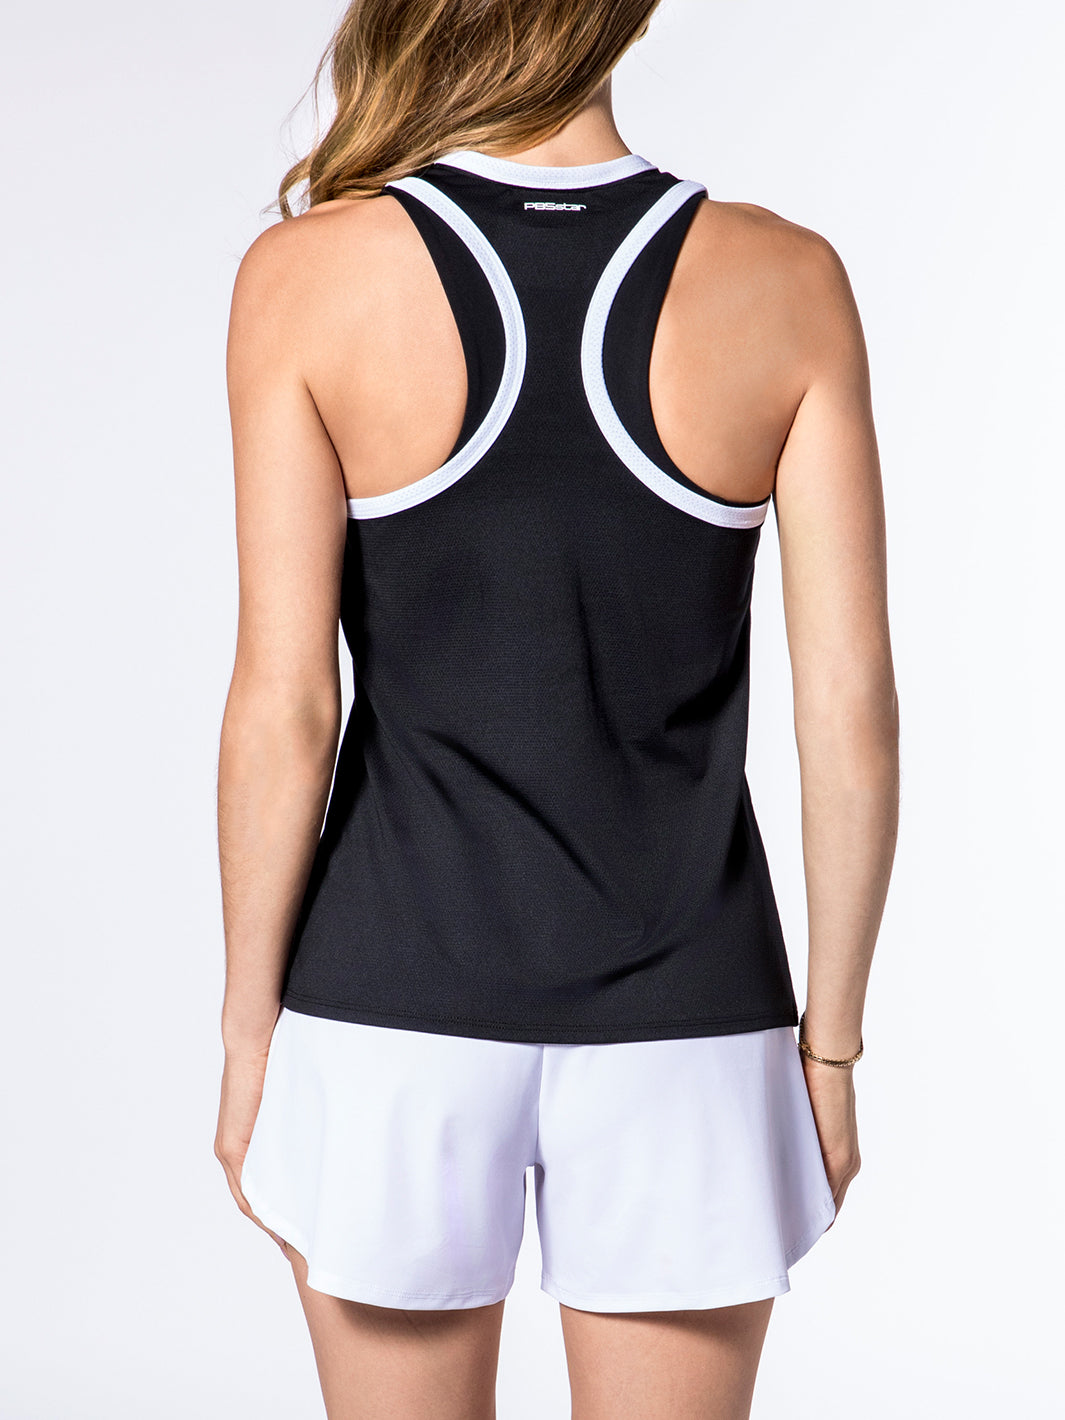 Rear view of a woman wearing PB5star's Core Tank in black with white trim, paired with white Signature Court Shorts, showcasing a sleek design that's both fashionable and functional for pickleball sportswear